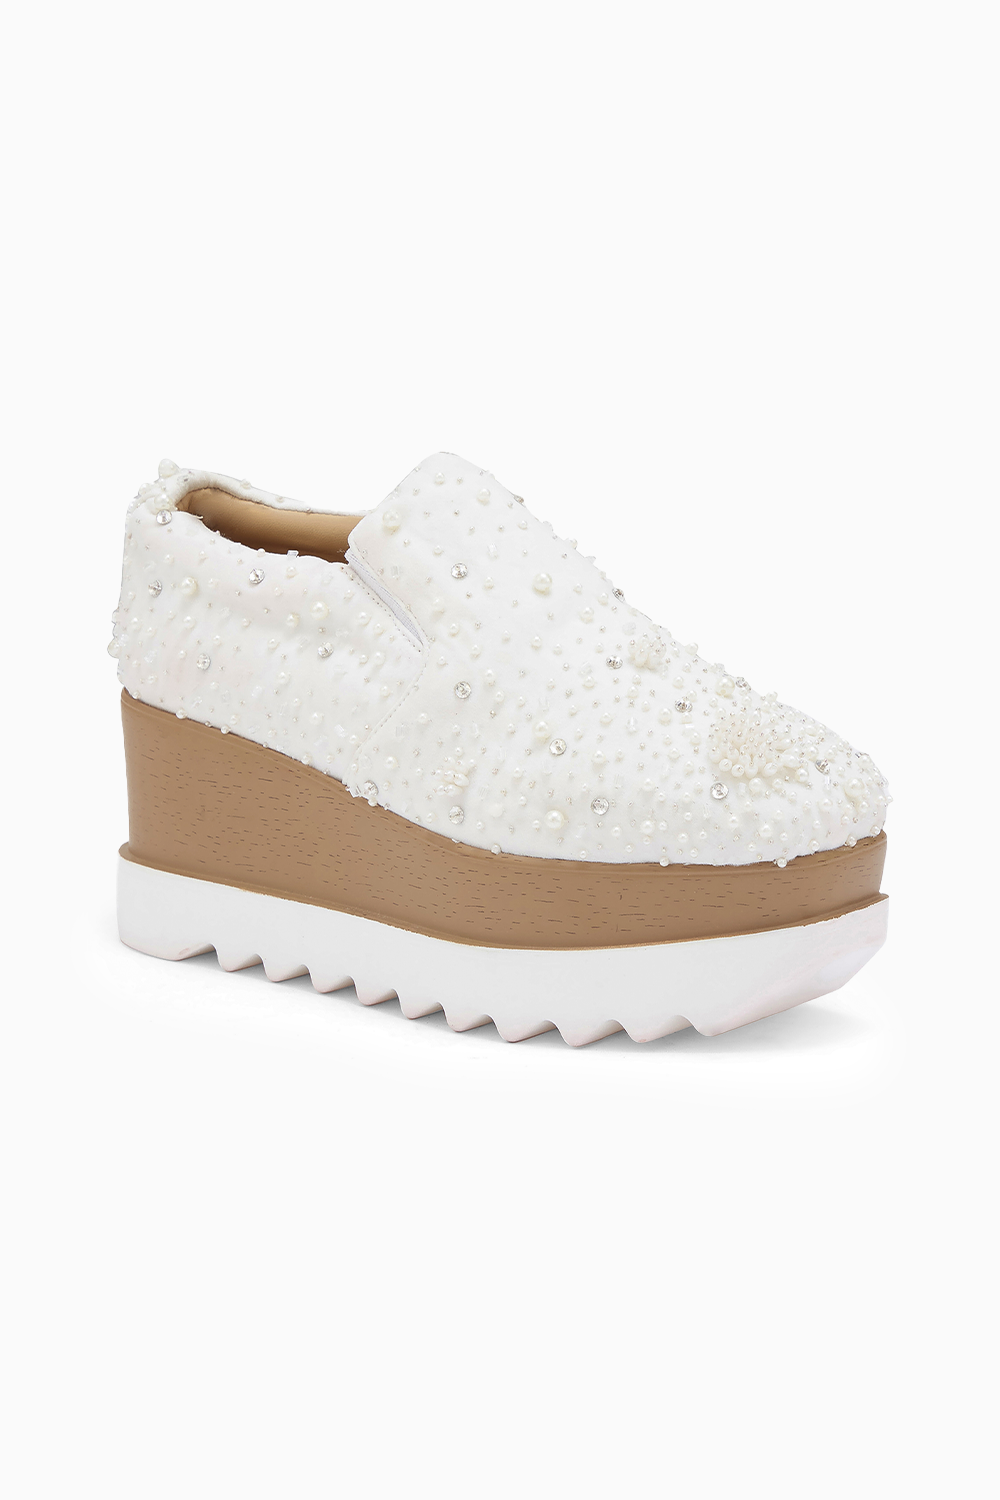 The Indian Fairy Wedding Wedge Sneakers